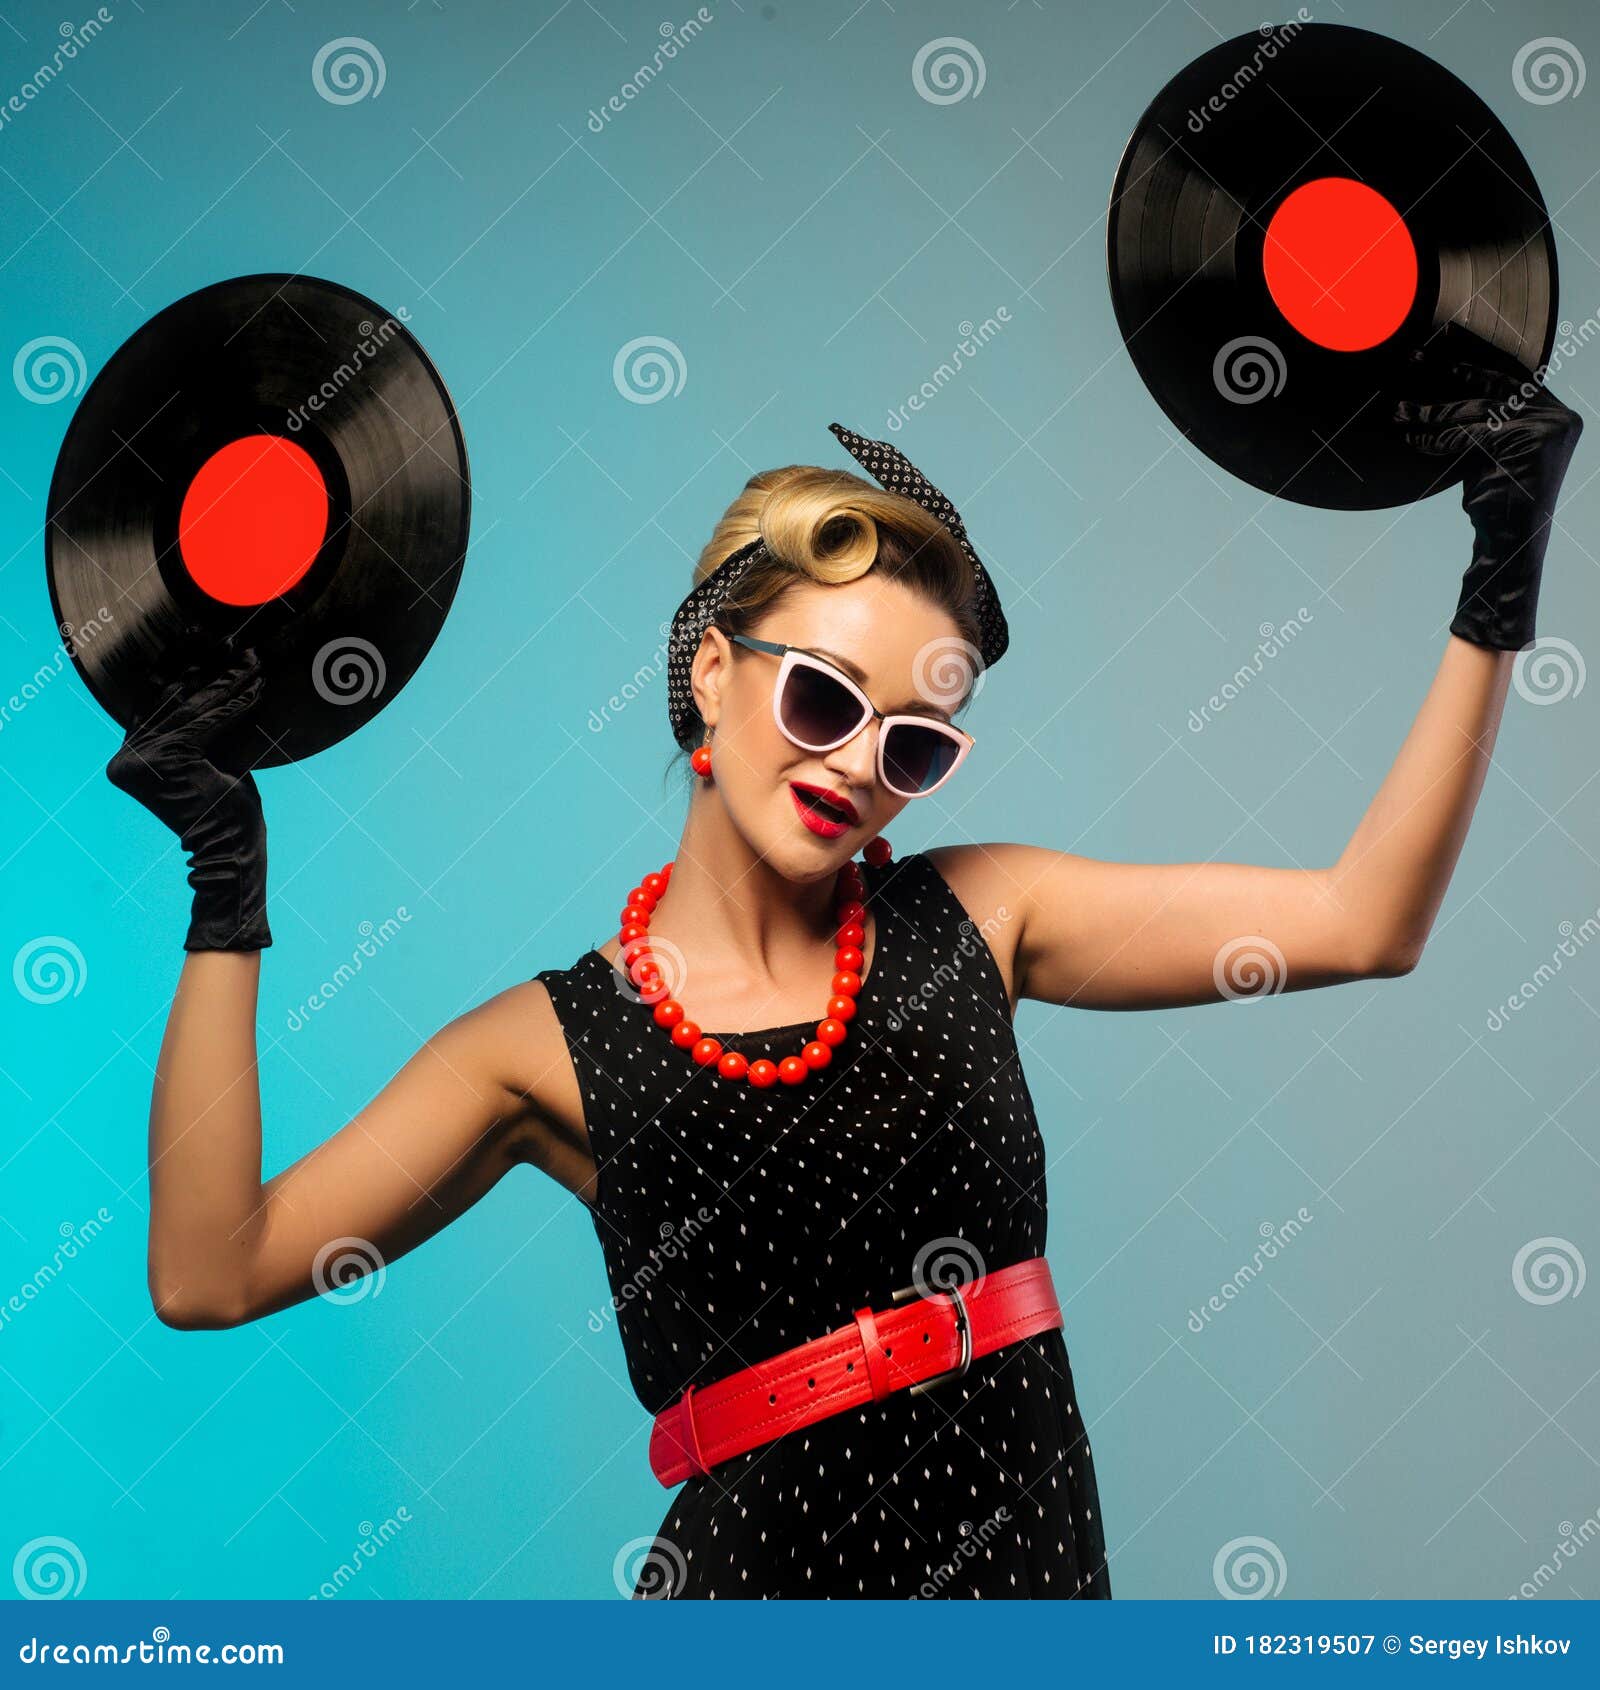 A Photo Of Glamorous Pin Up Girl Holding Vinyl Lp In Hand Stock Image